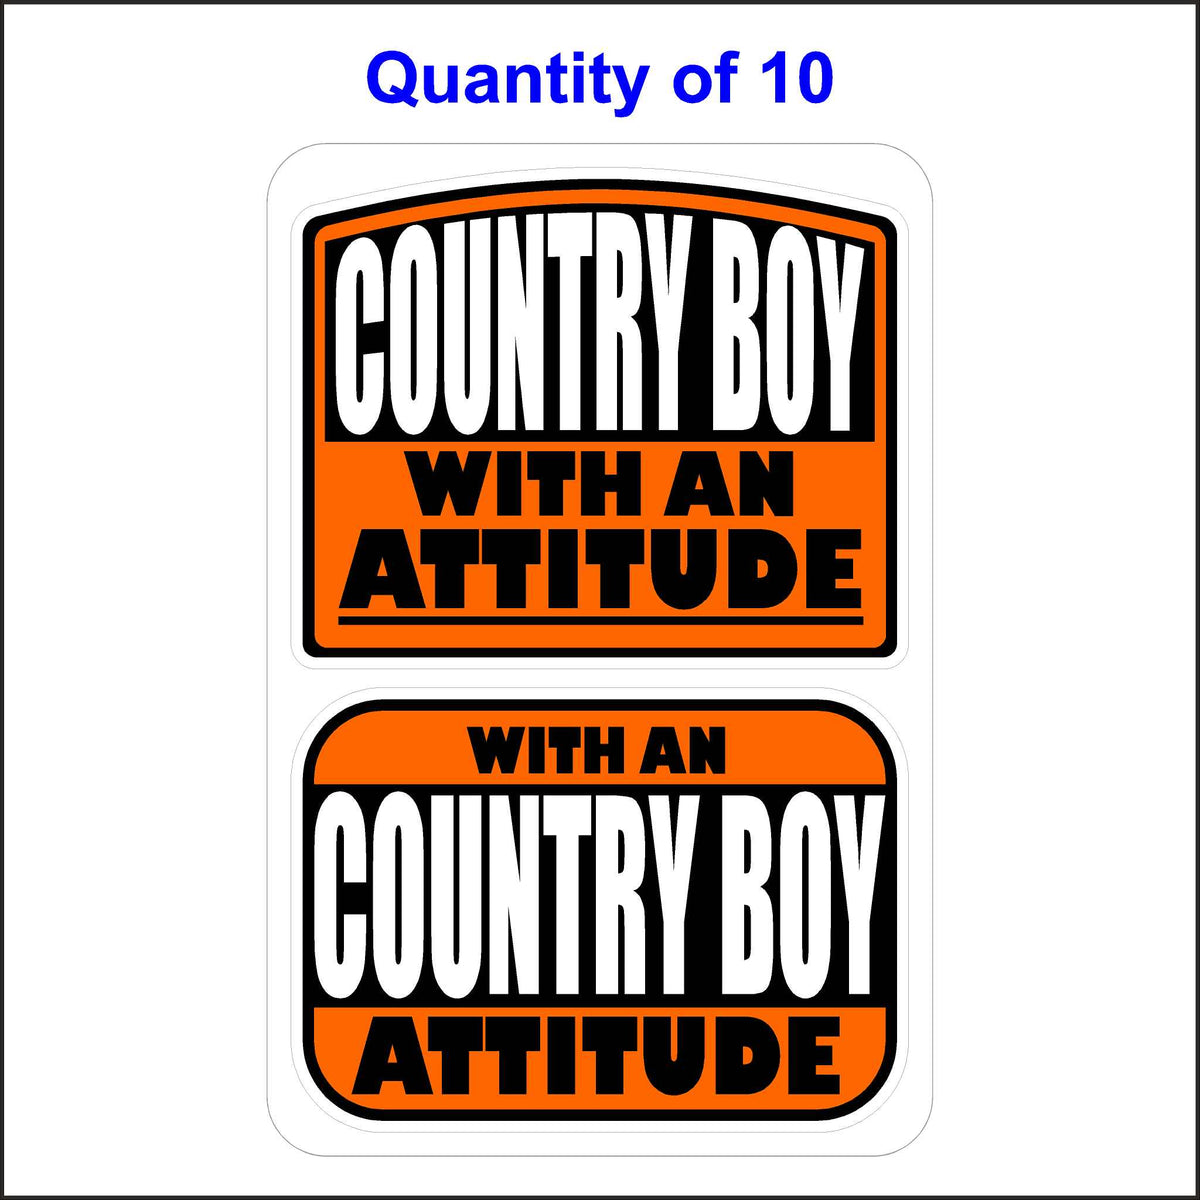 Country Boy with an Attitude Stickers 10 Quantity.